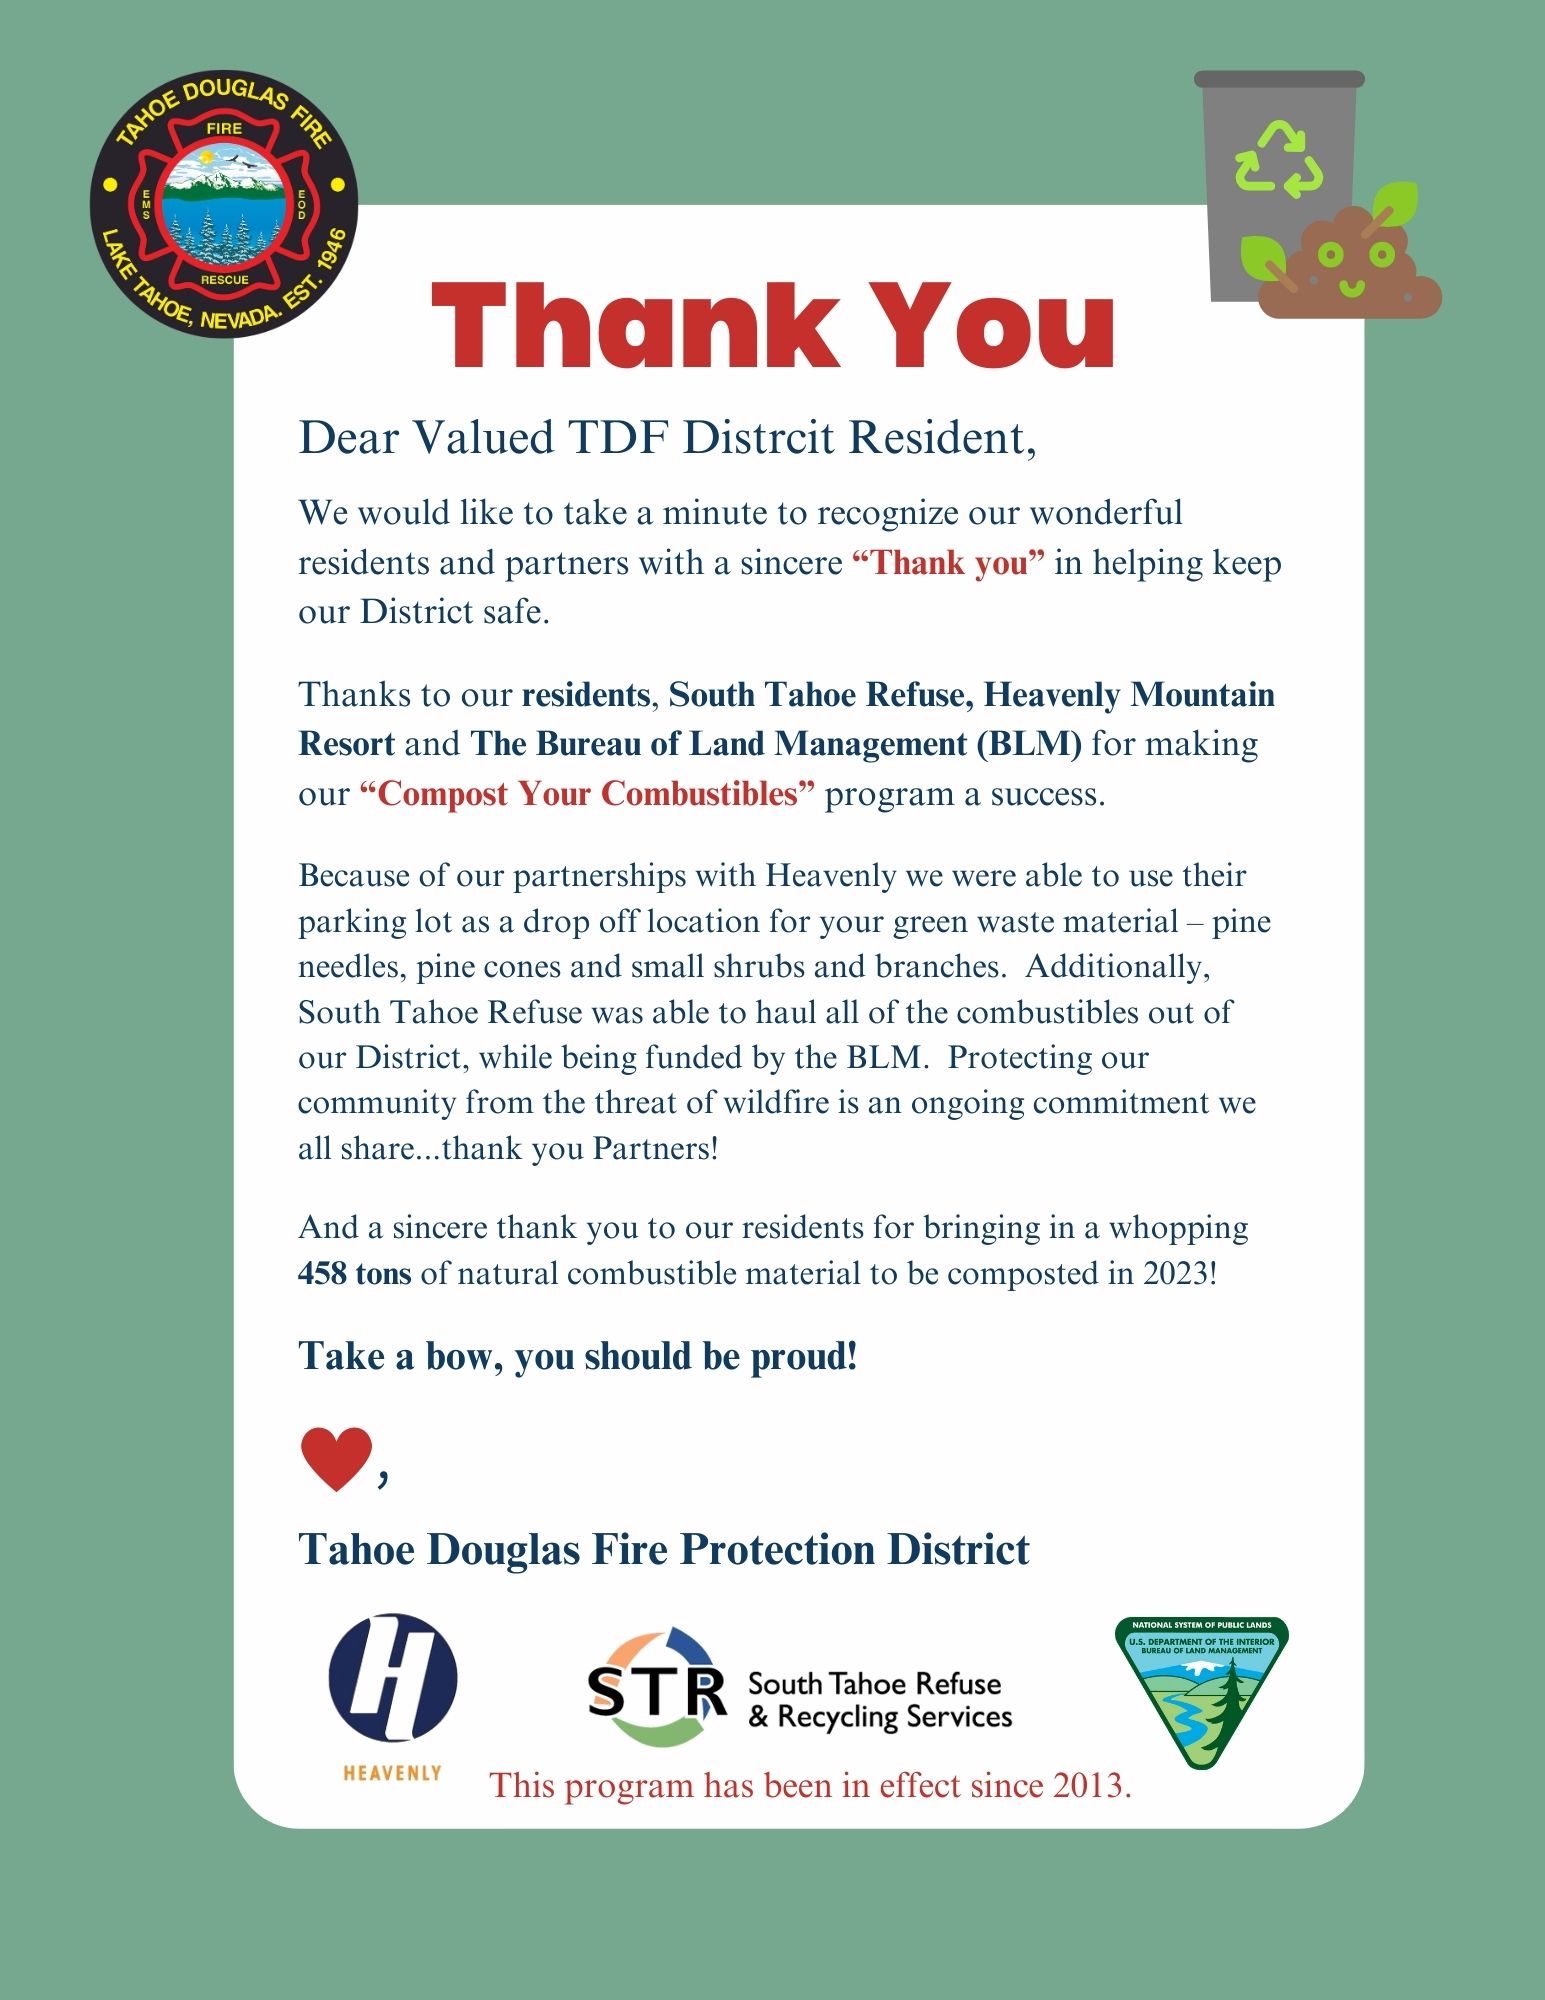 Thank You valued TDF Residents and partners!